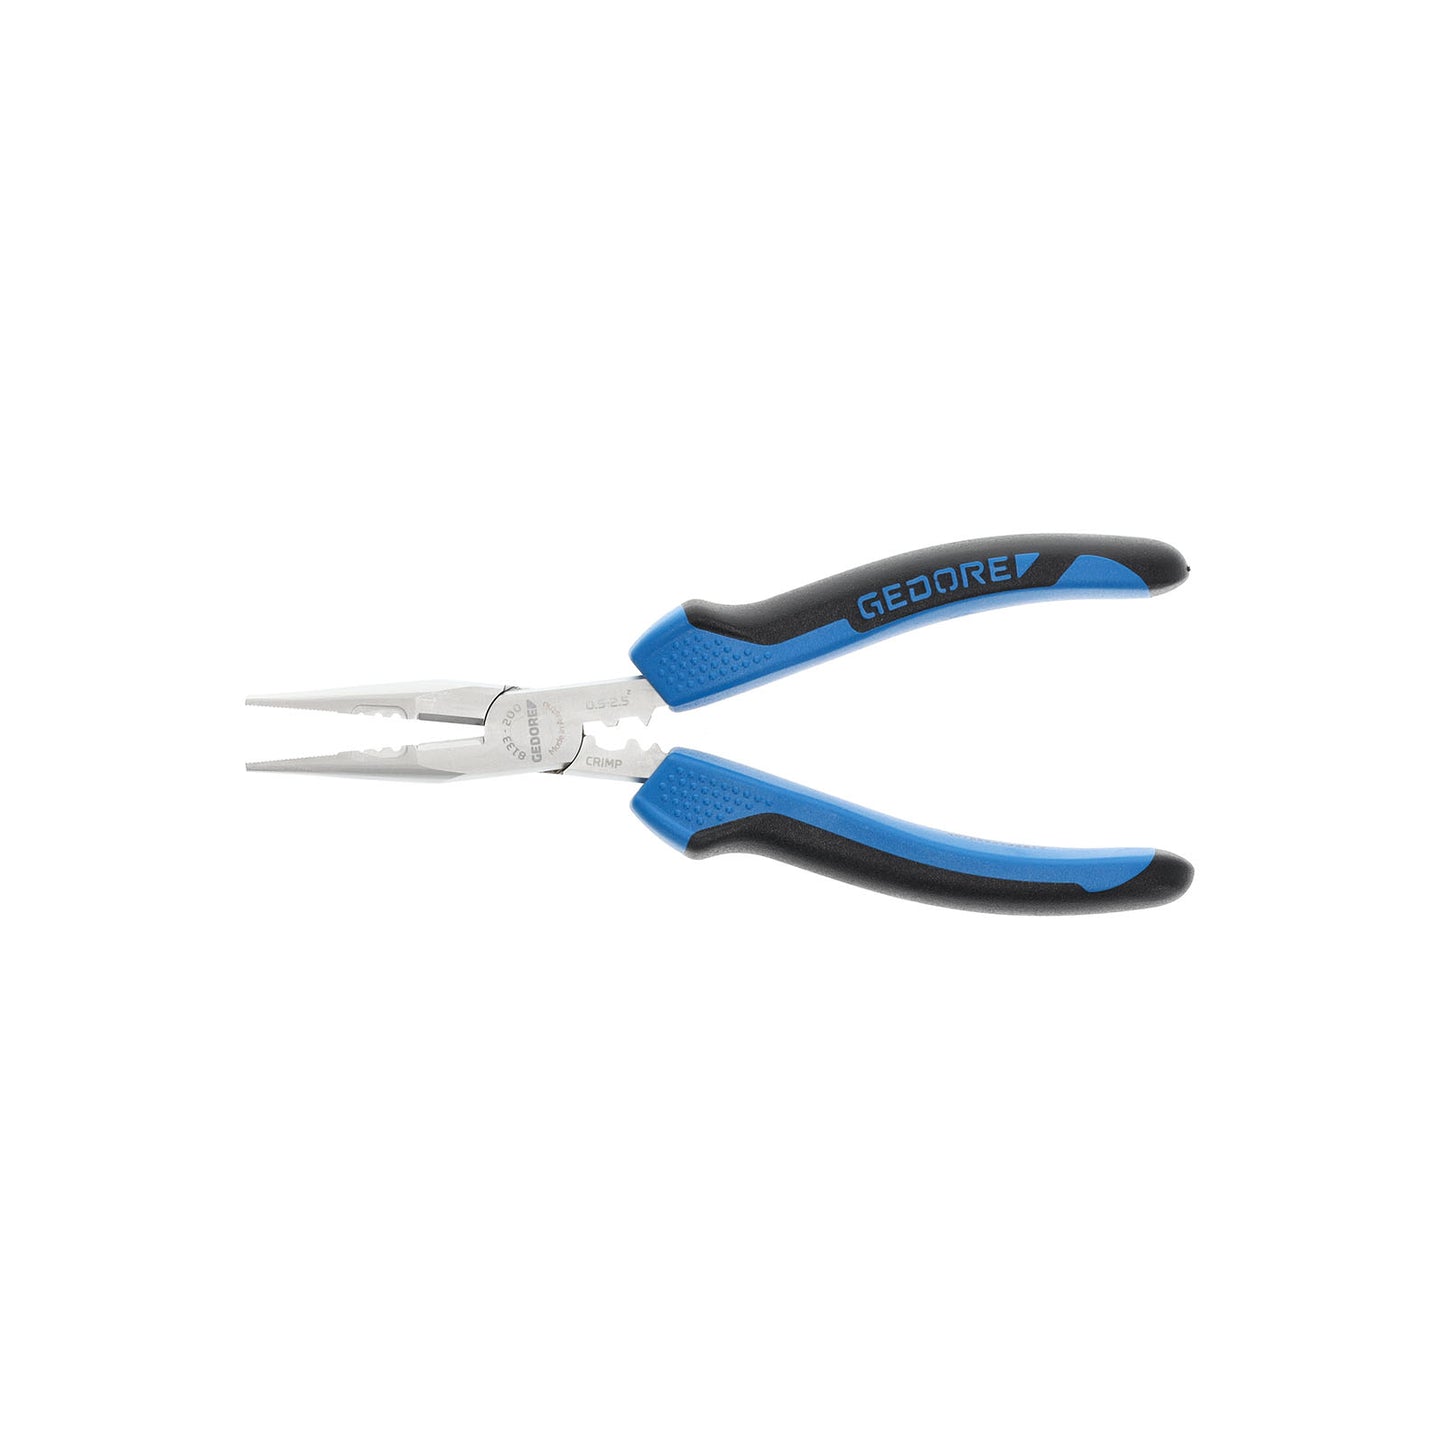 GEDORE 8133-200 JC - Triple Action Pliers 200mm (2676079)